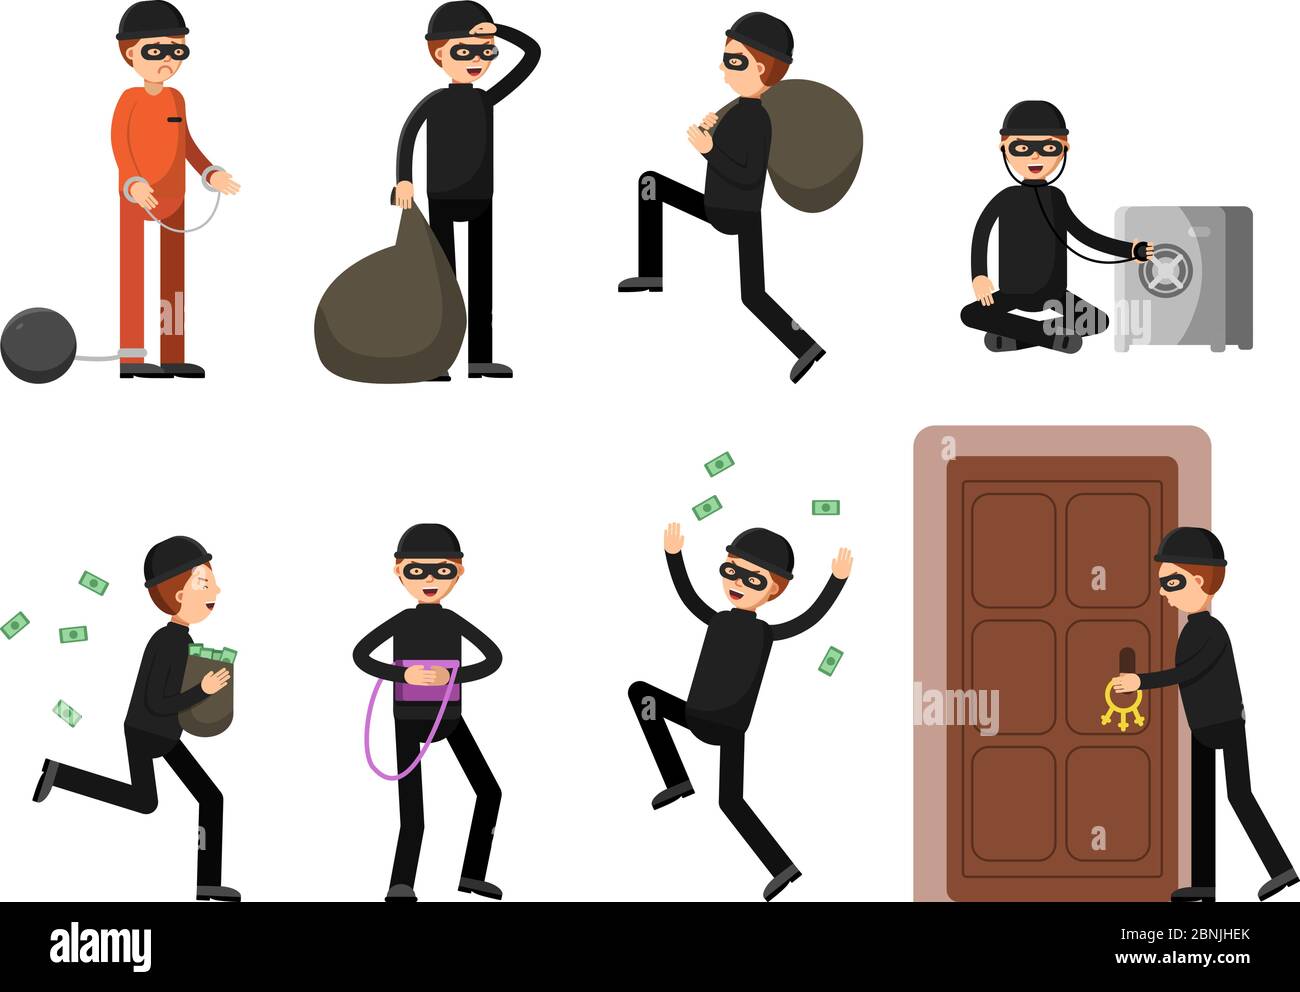 Criminal illustrations of theif characters in different action poses Stock Vector